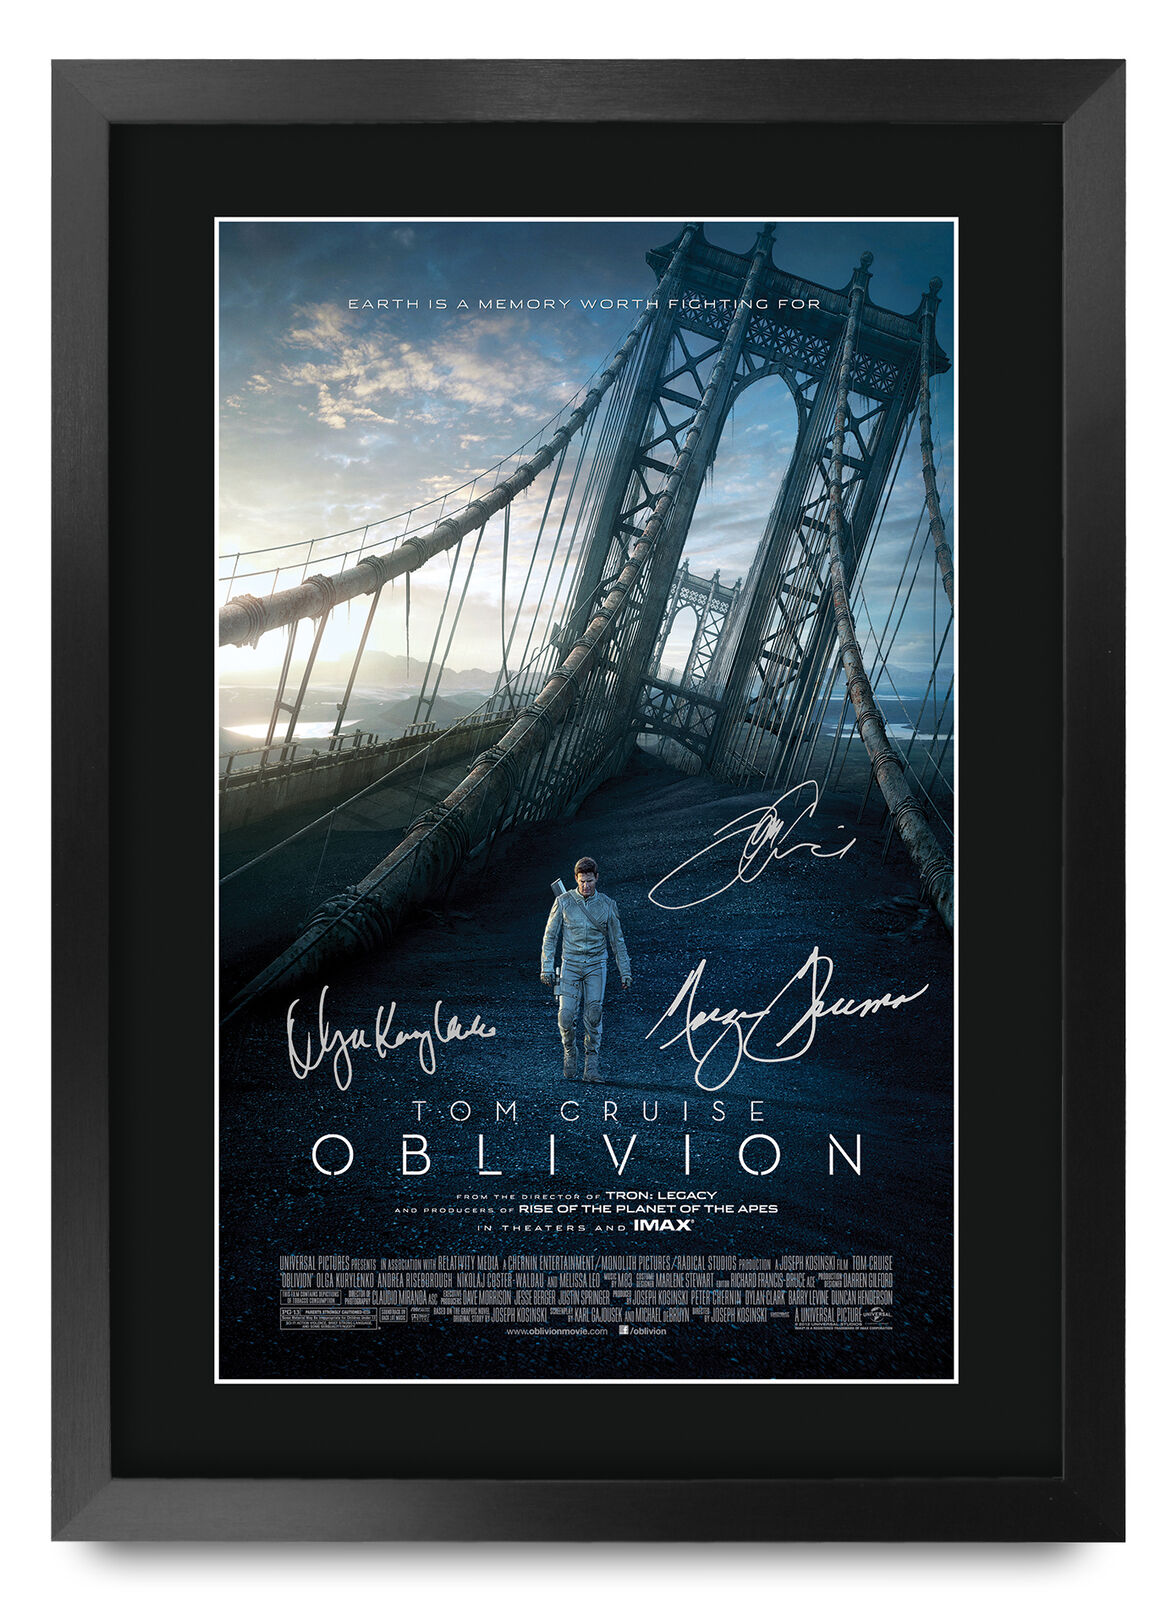 Oblivion Tom Cruise Cool Gift Idea Printed A3 Framed Poster Signed for Movie Fan